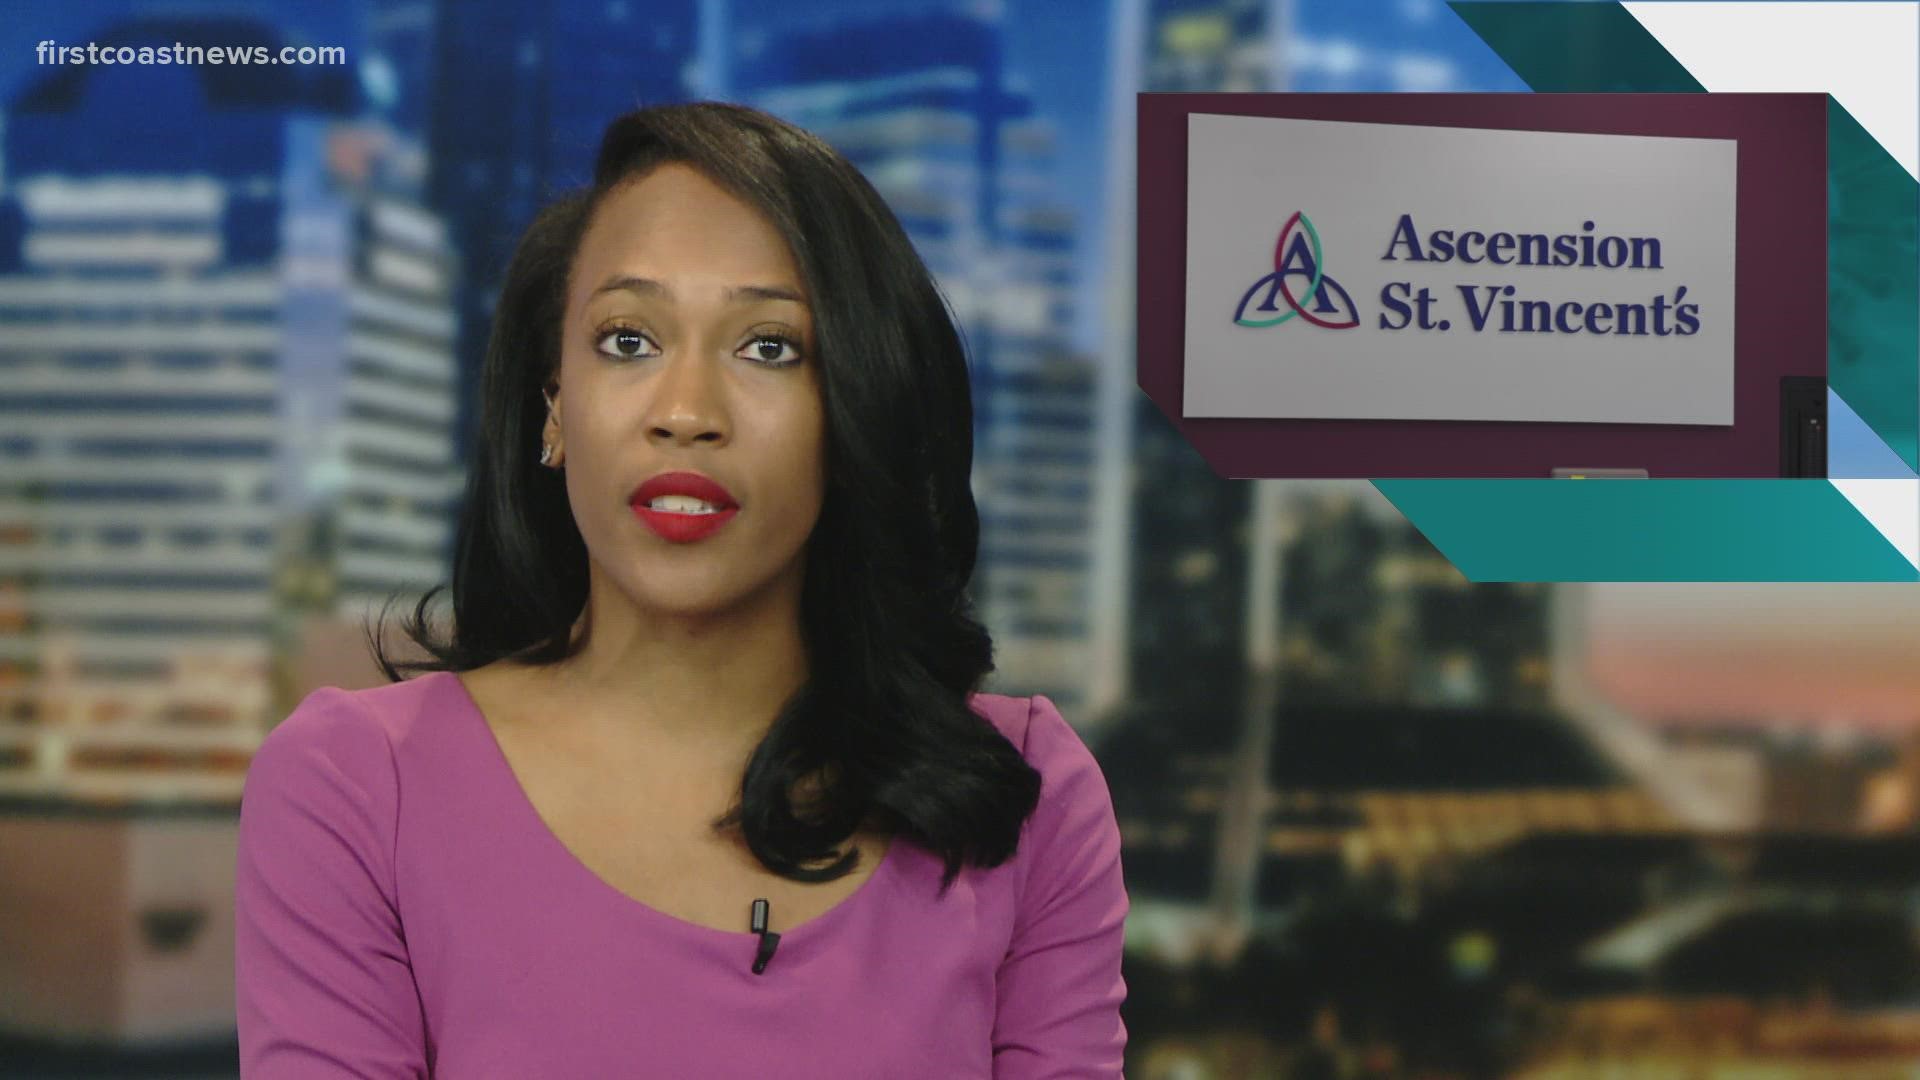 Ascension St. Vincent's in Jacksonville will allow employees who are not vaccinated to continue working regardless of their vaccination status.